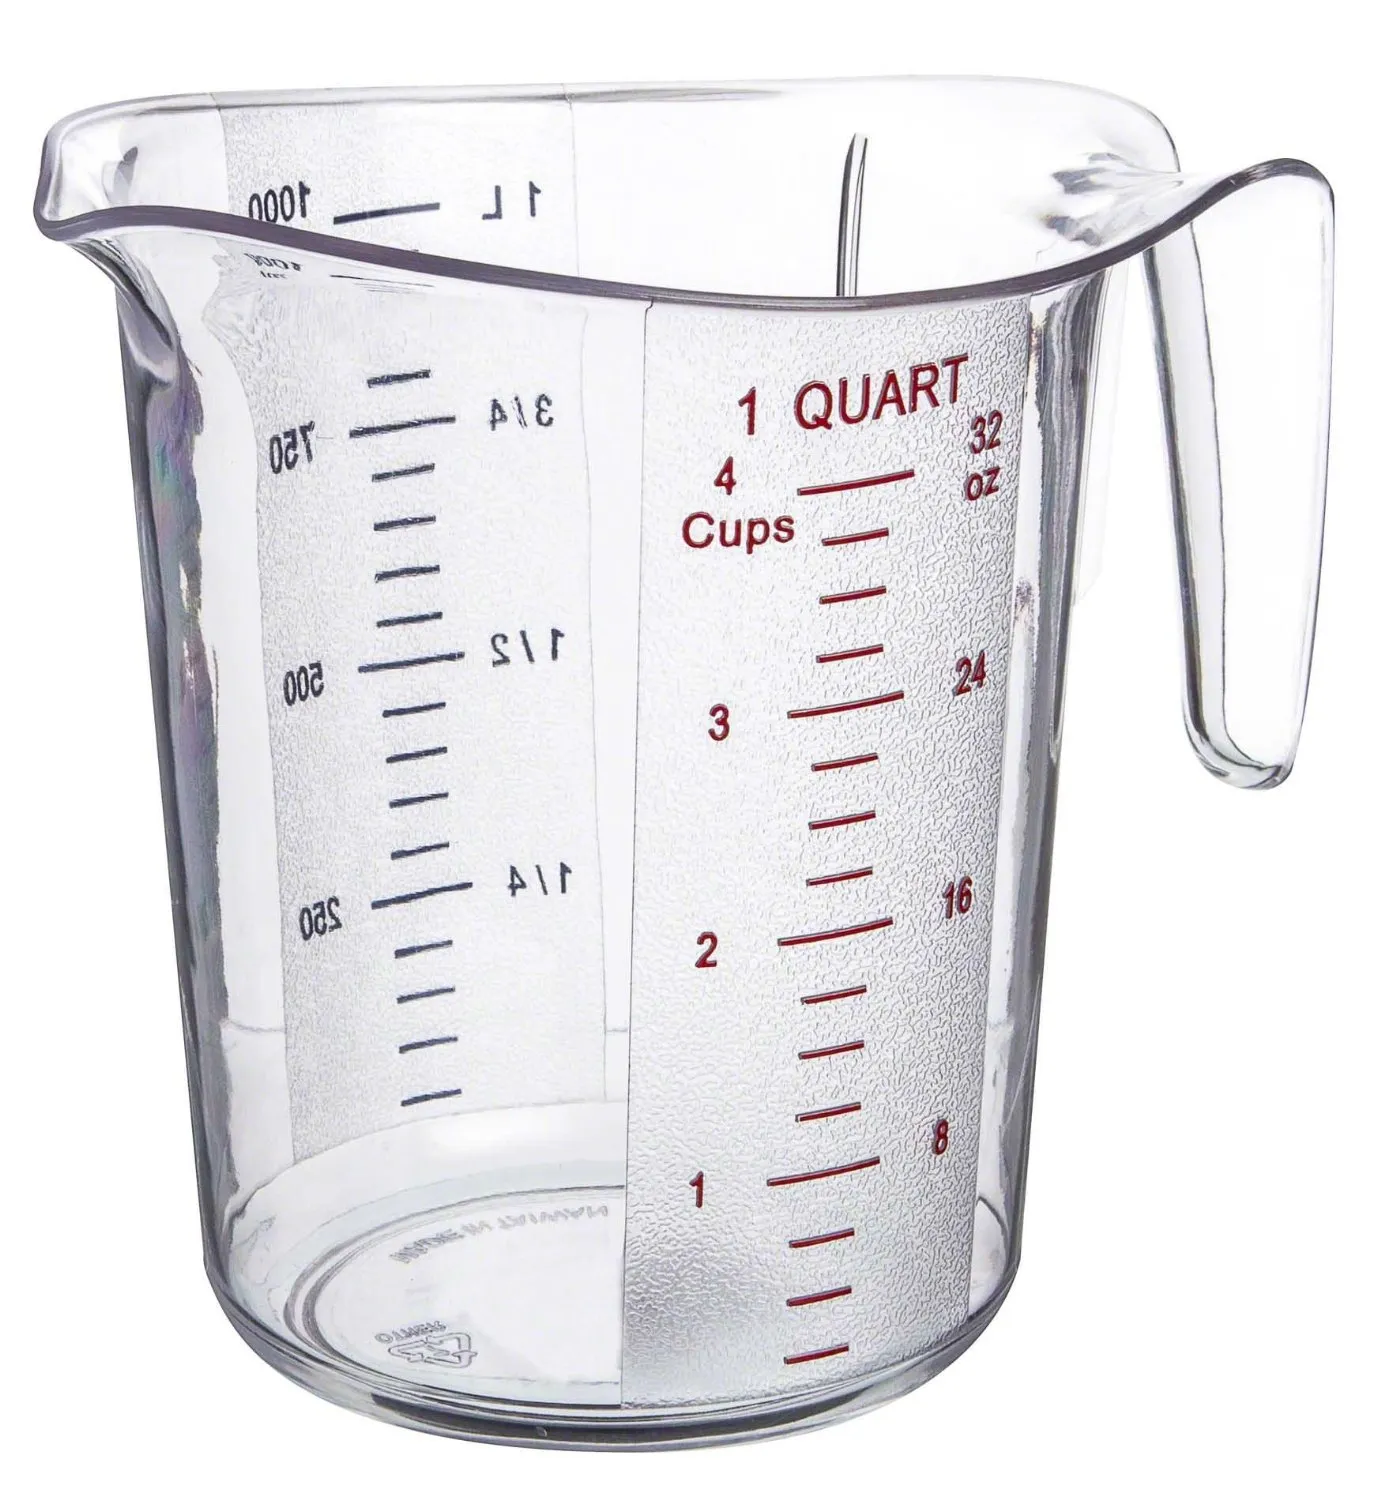 1/2 Cup (120 ml | 120 CC | 4 oz) Measuring Cup, Stainless Steel Measuring Cups, Metal Measuring Cup, Kitchen Gadgets for Cooking